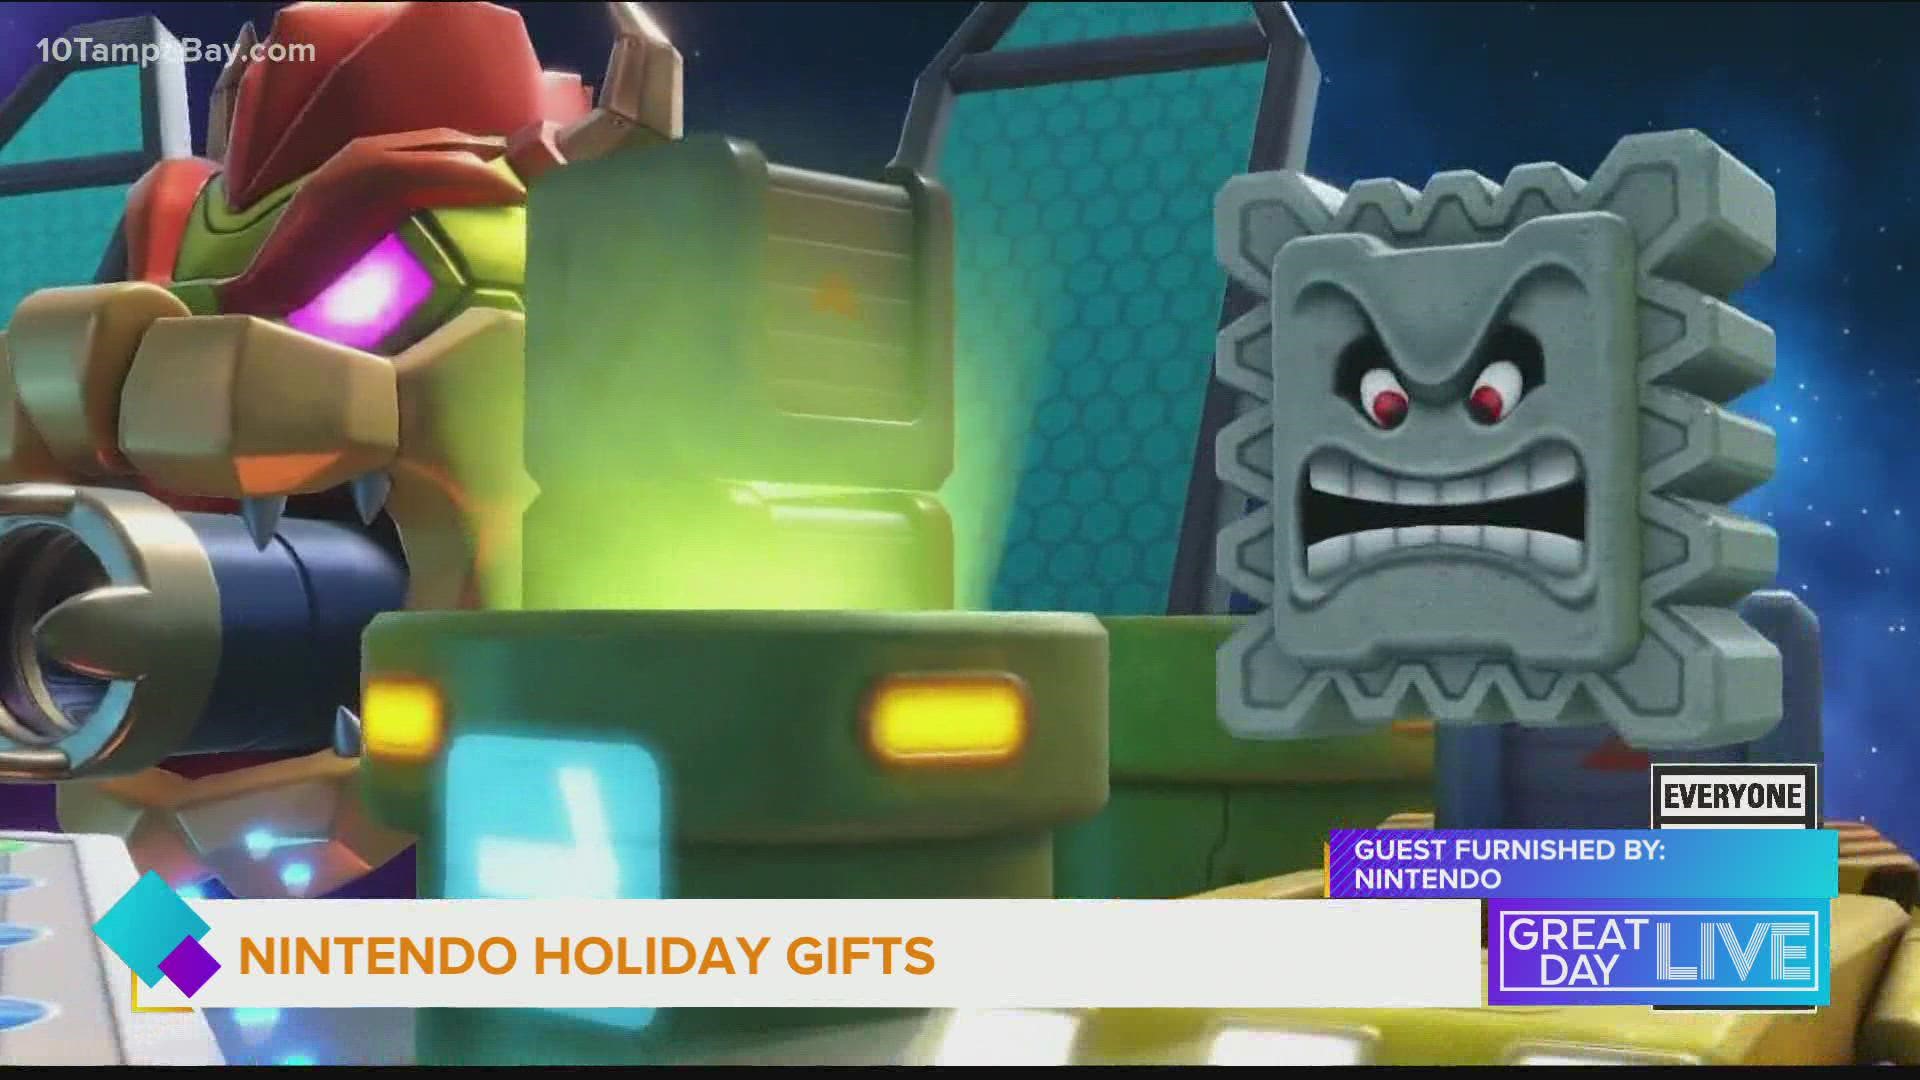 We get the scoop on what's new with Nintendo this holiday season